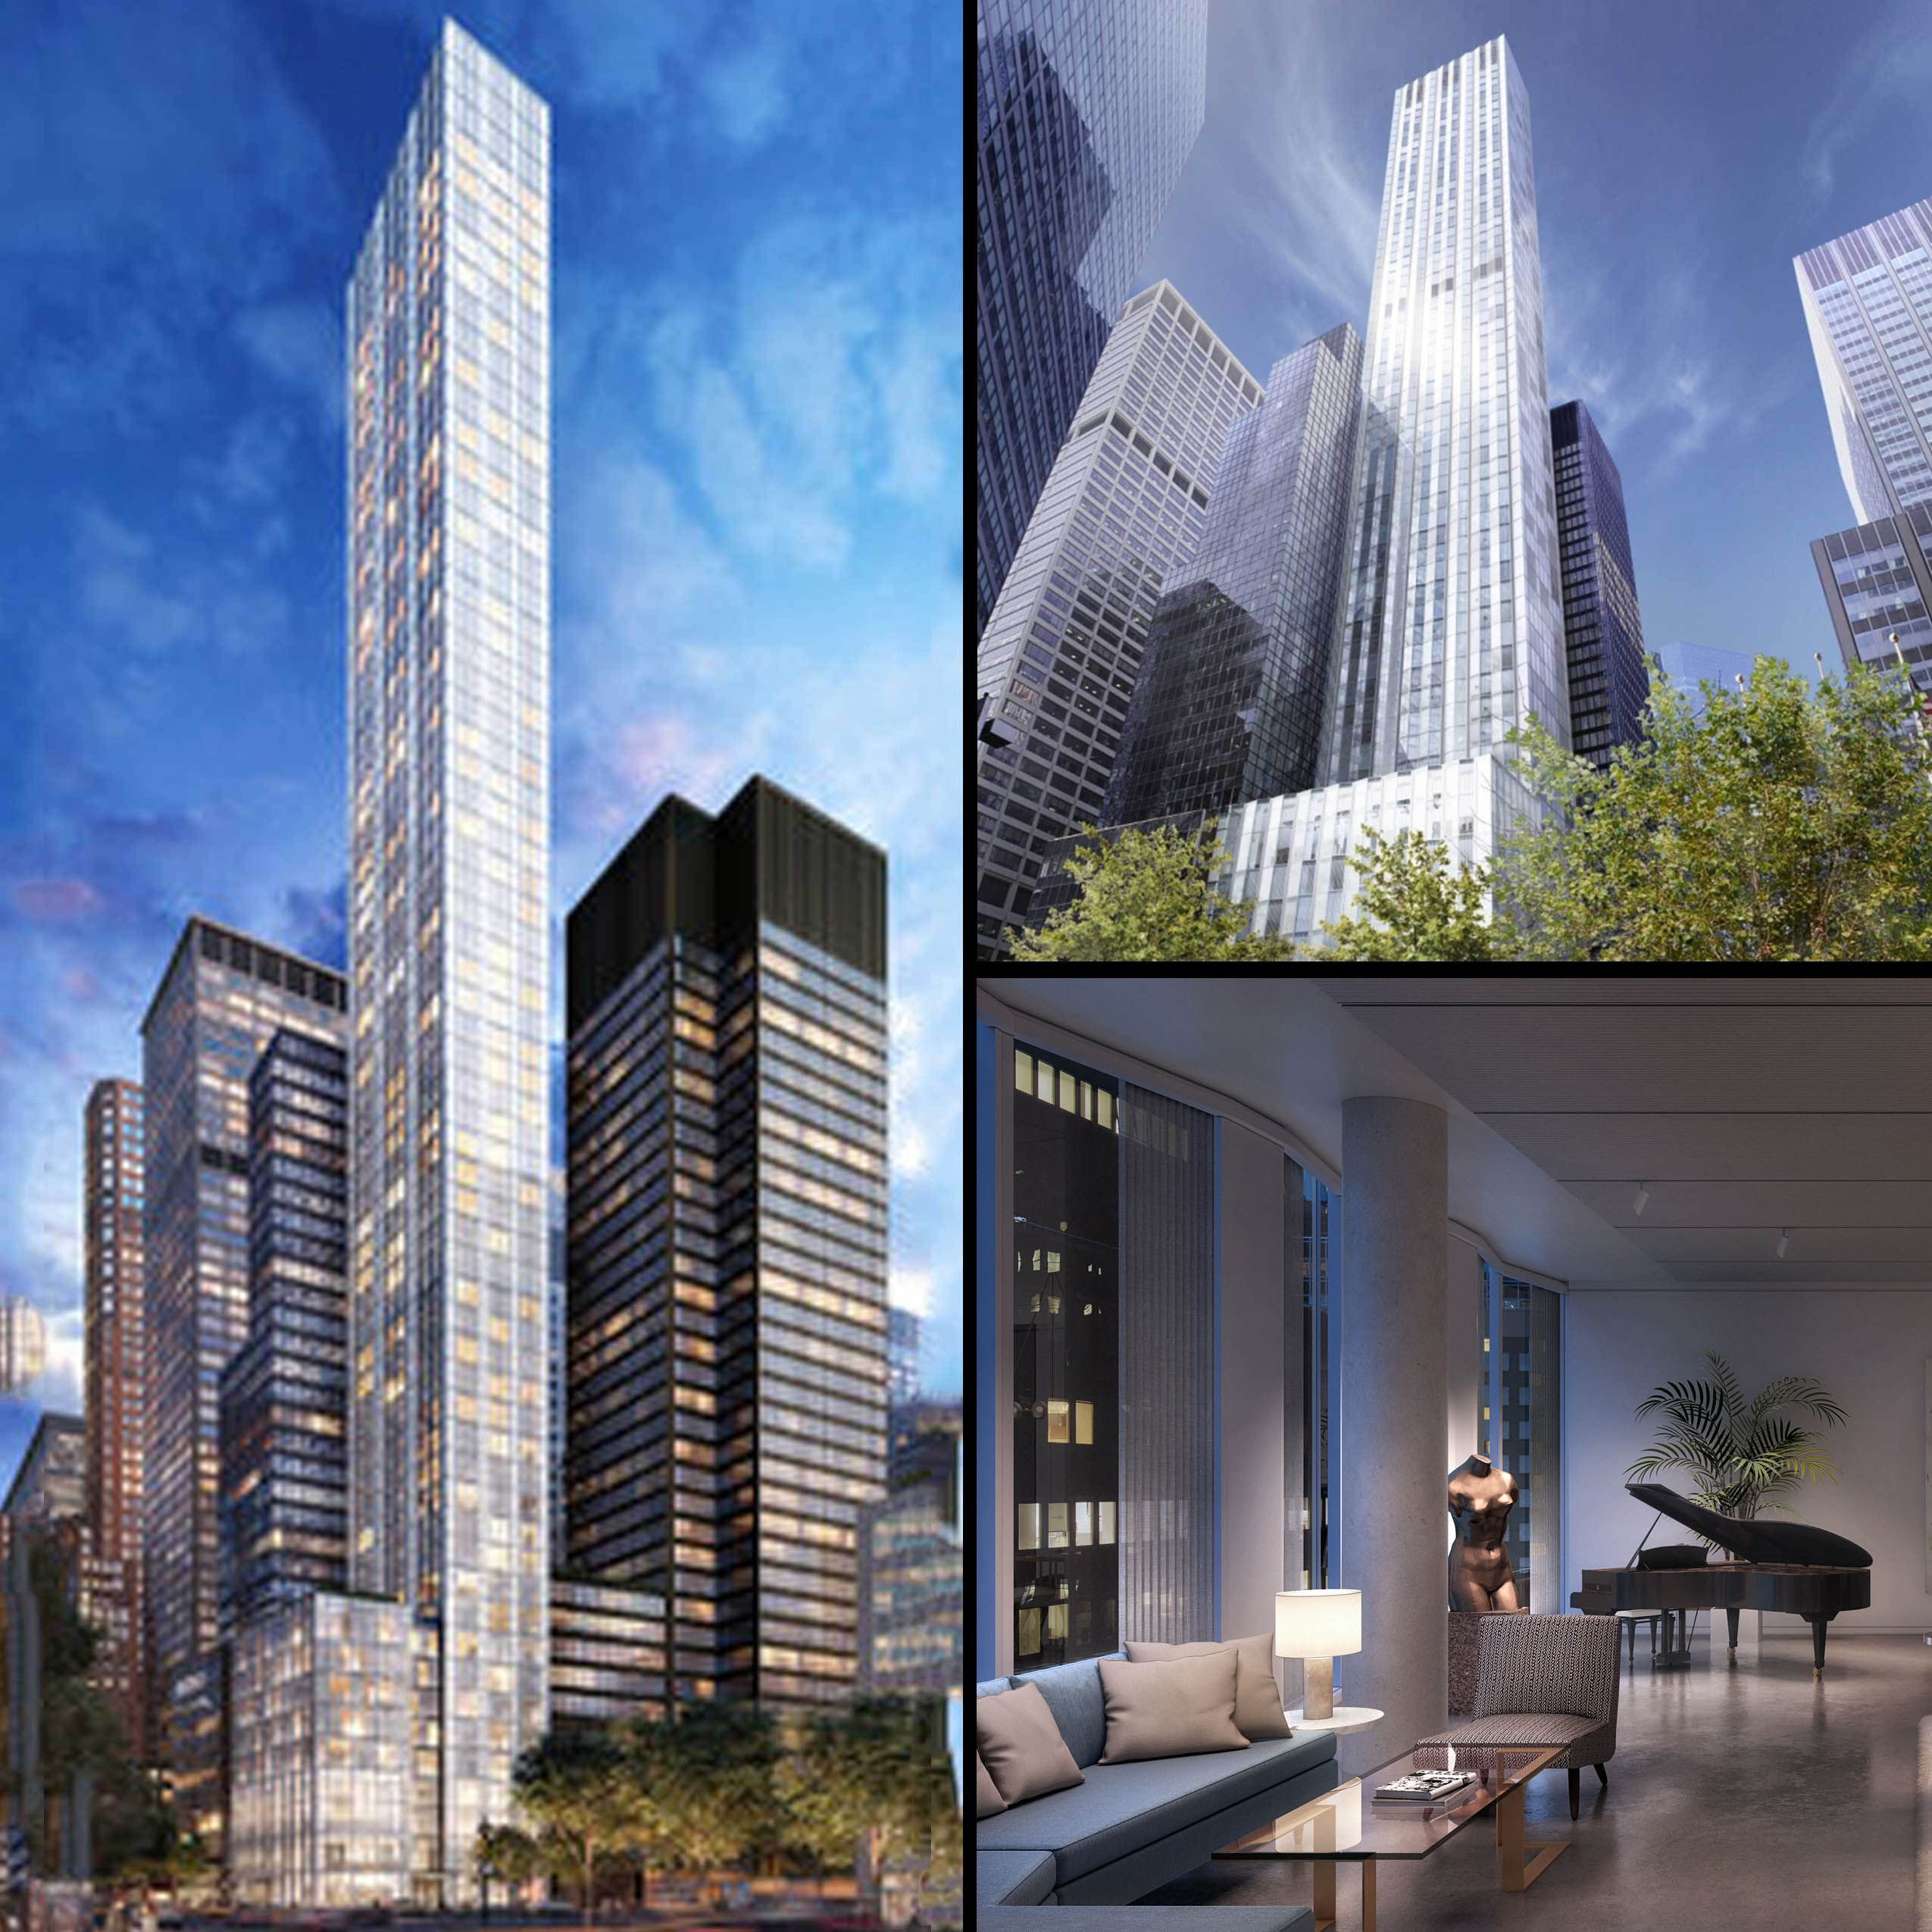 skyscrapers, 100 east 53rd street, norman foster, seagram building, 100e53, rfr realty, 100 east 53rd street exterior, 100 east 53rd street rendering, 100 east 53rd street interior, new york architecture, nyc skyscrapers, luxury residential, residential skyscraper, new york's super-slenders, slender skyscrapers